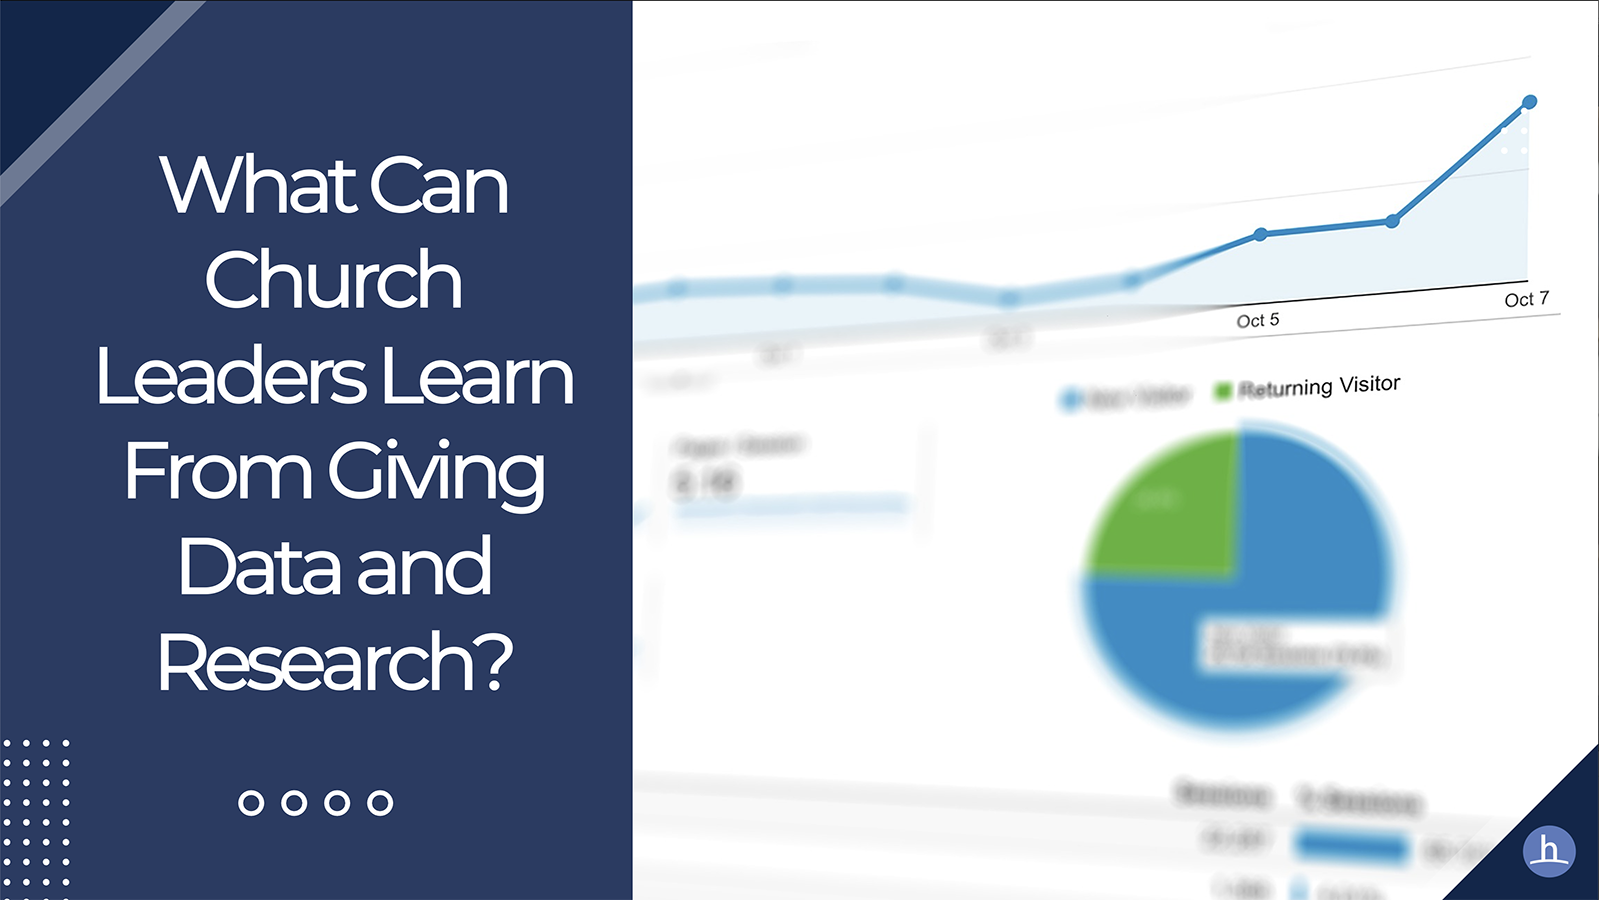 What Can Church Leaders Learn From Giving Data and Research